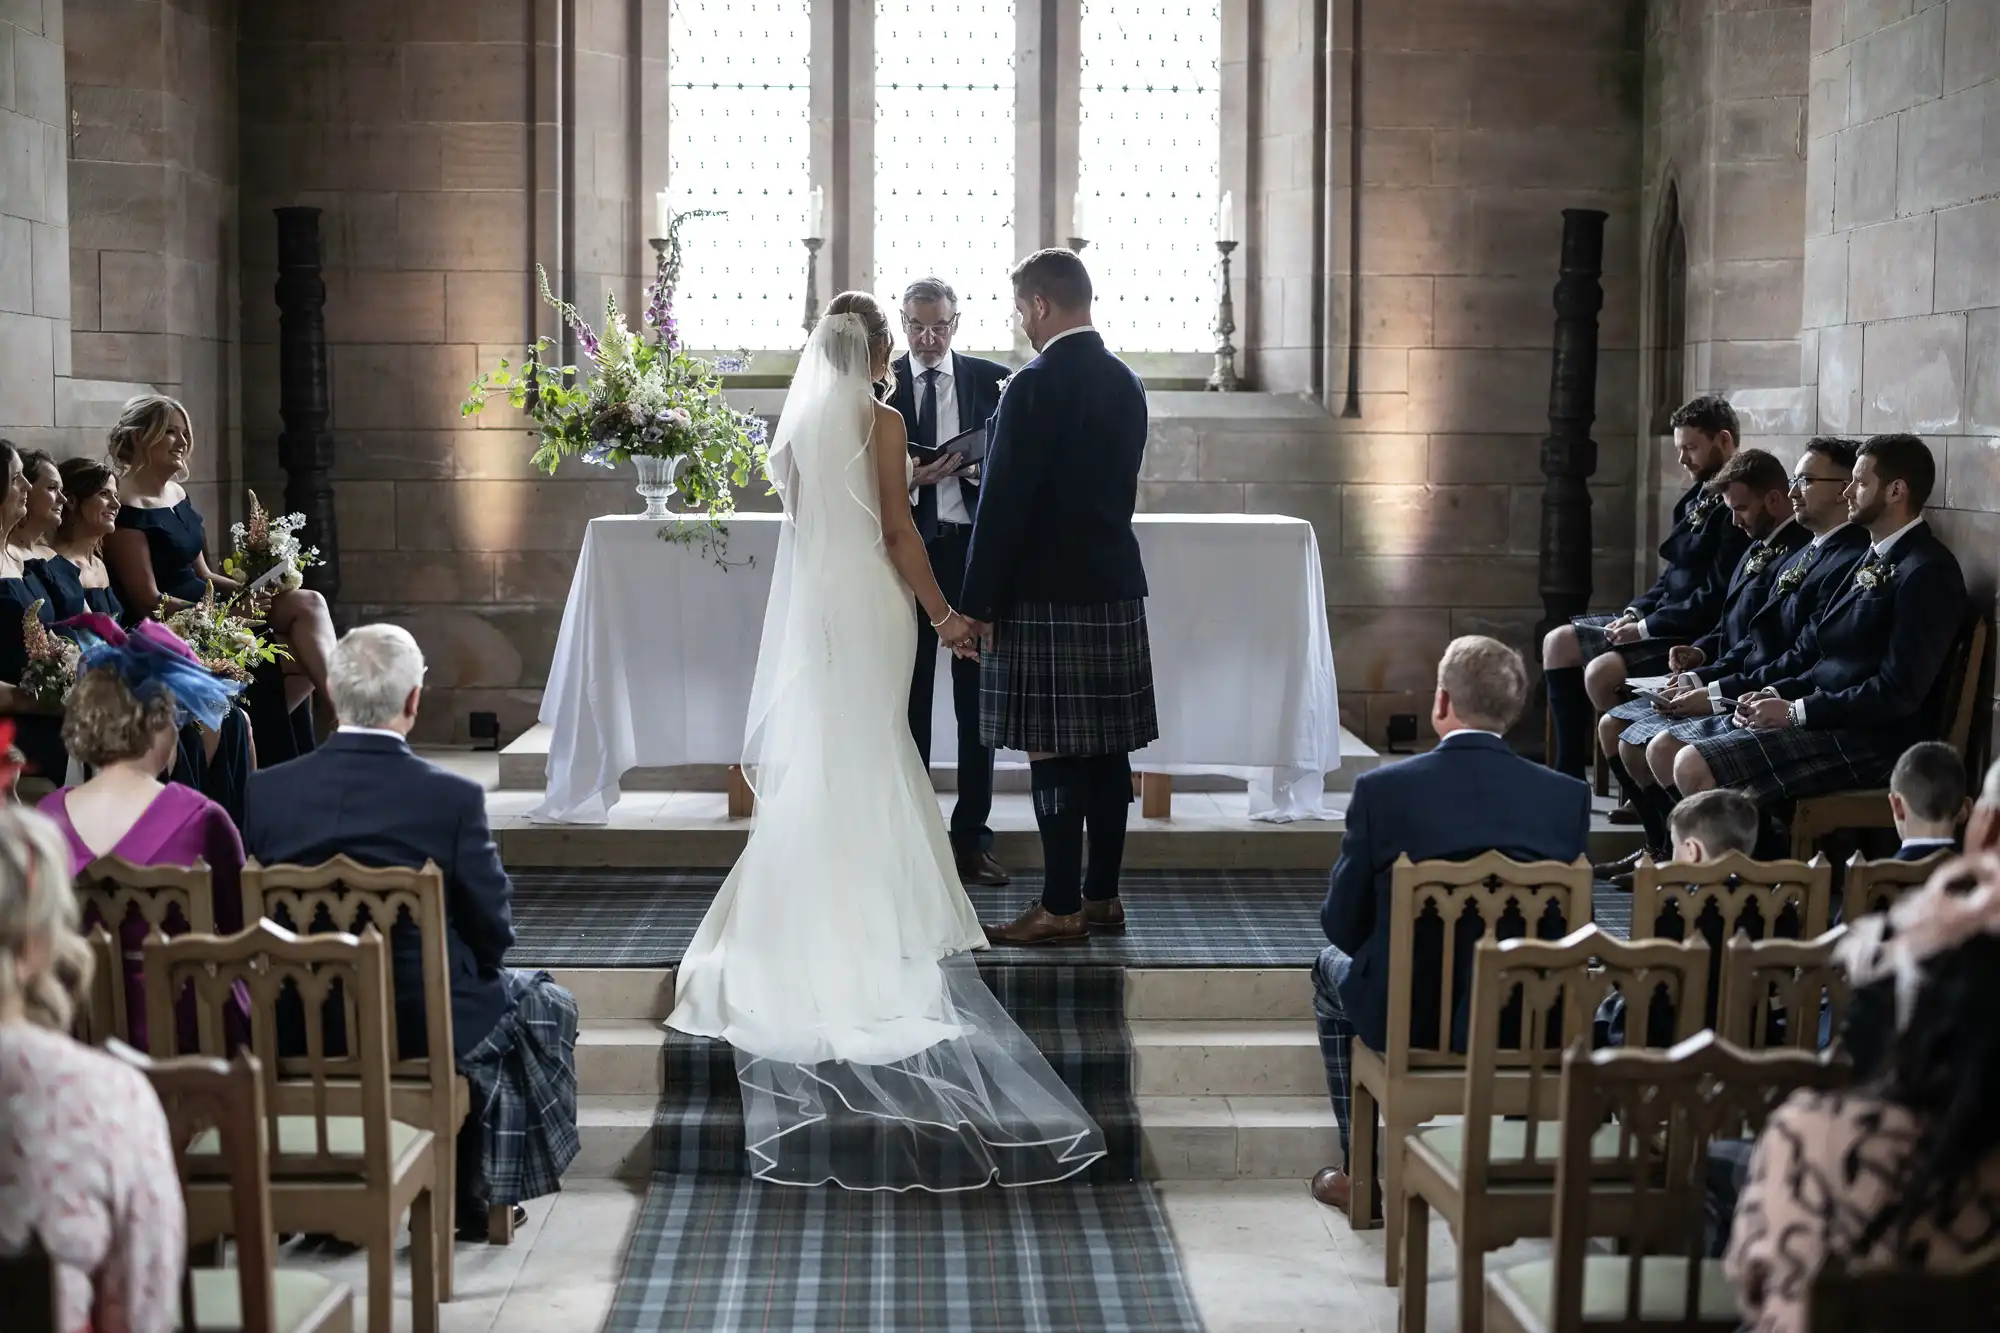 A bride and groom exchanging vows in a church, with guests in kilts observing from wooden pews.